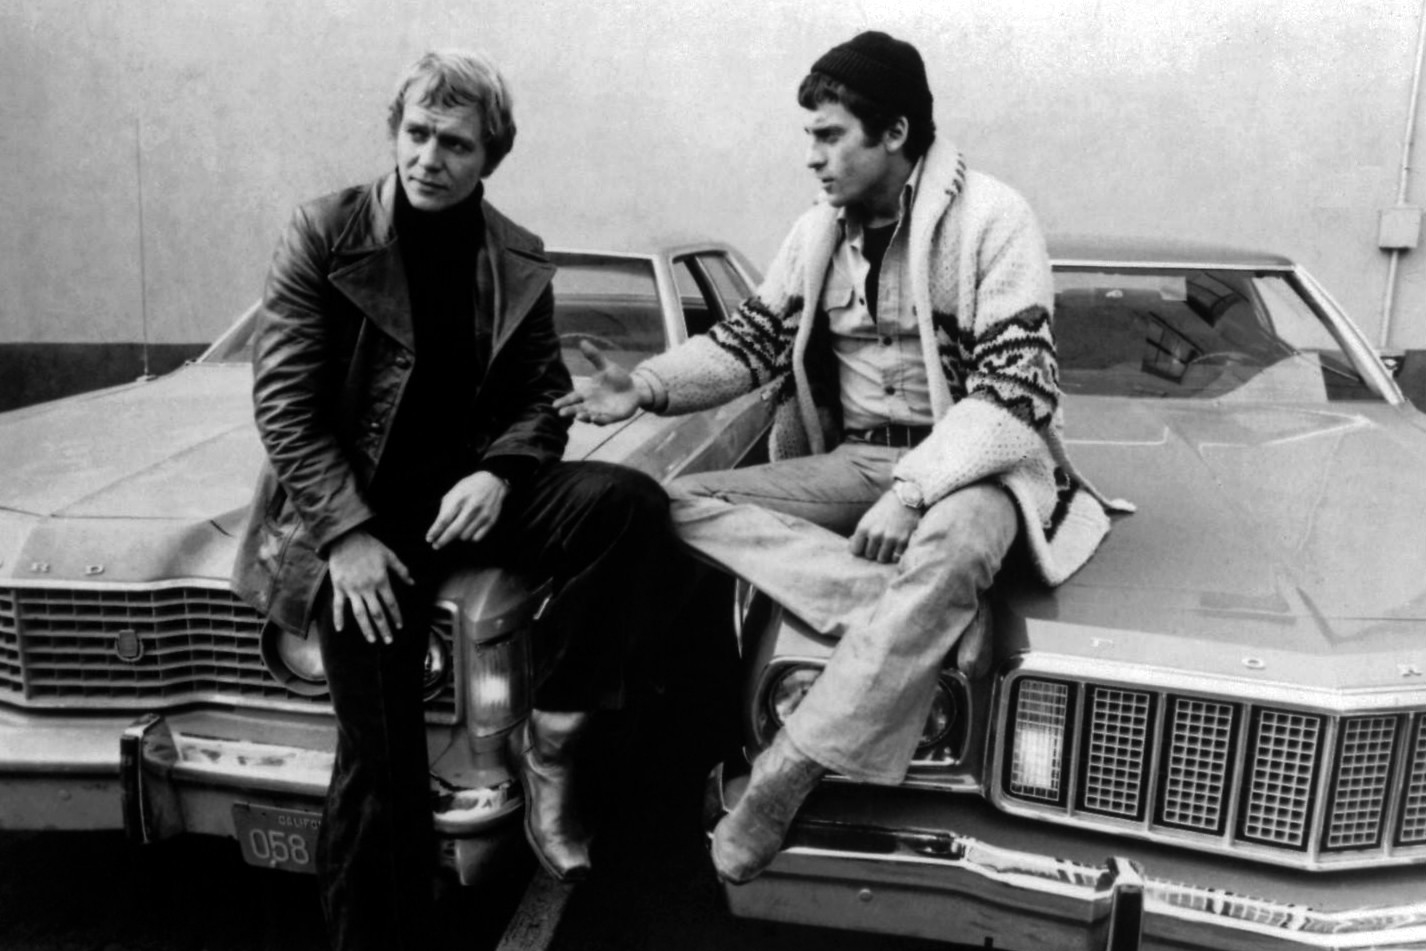 Starsky and hutch car editorial stock photo. Image of display